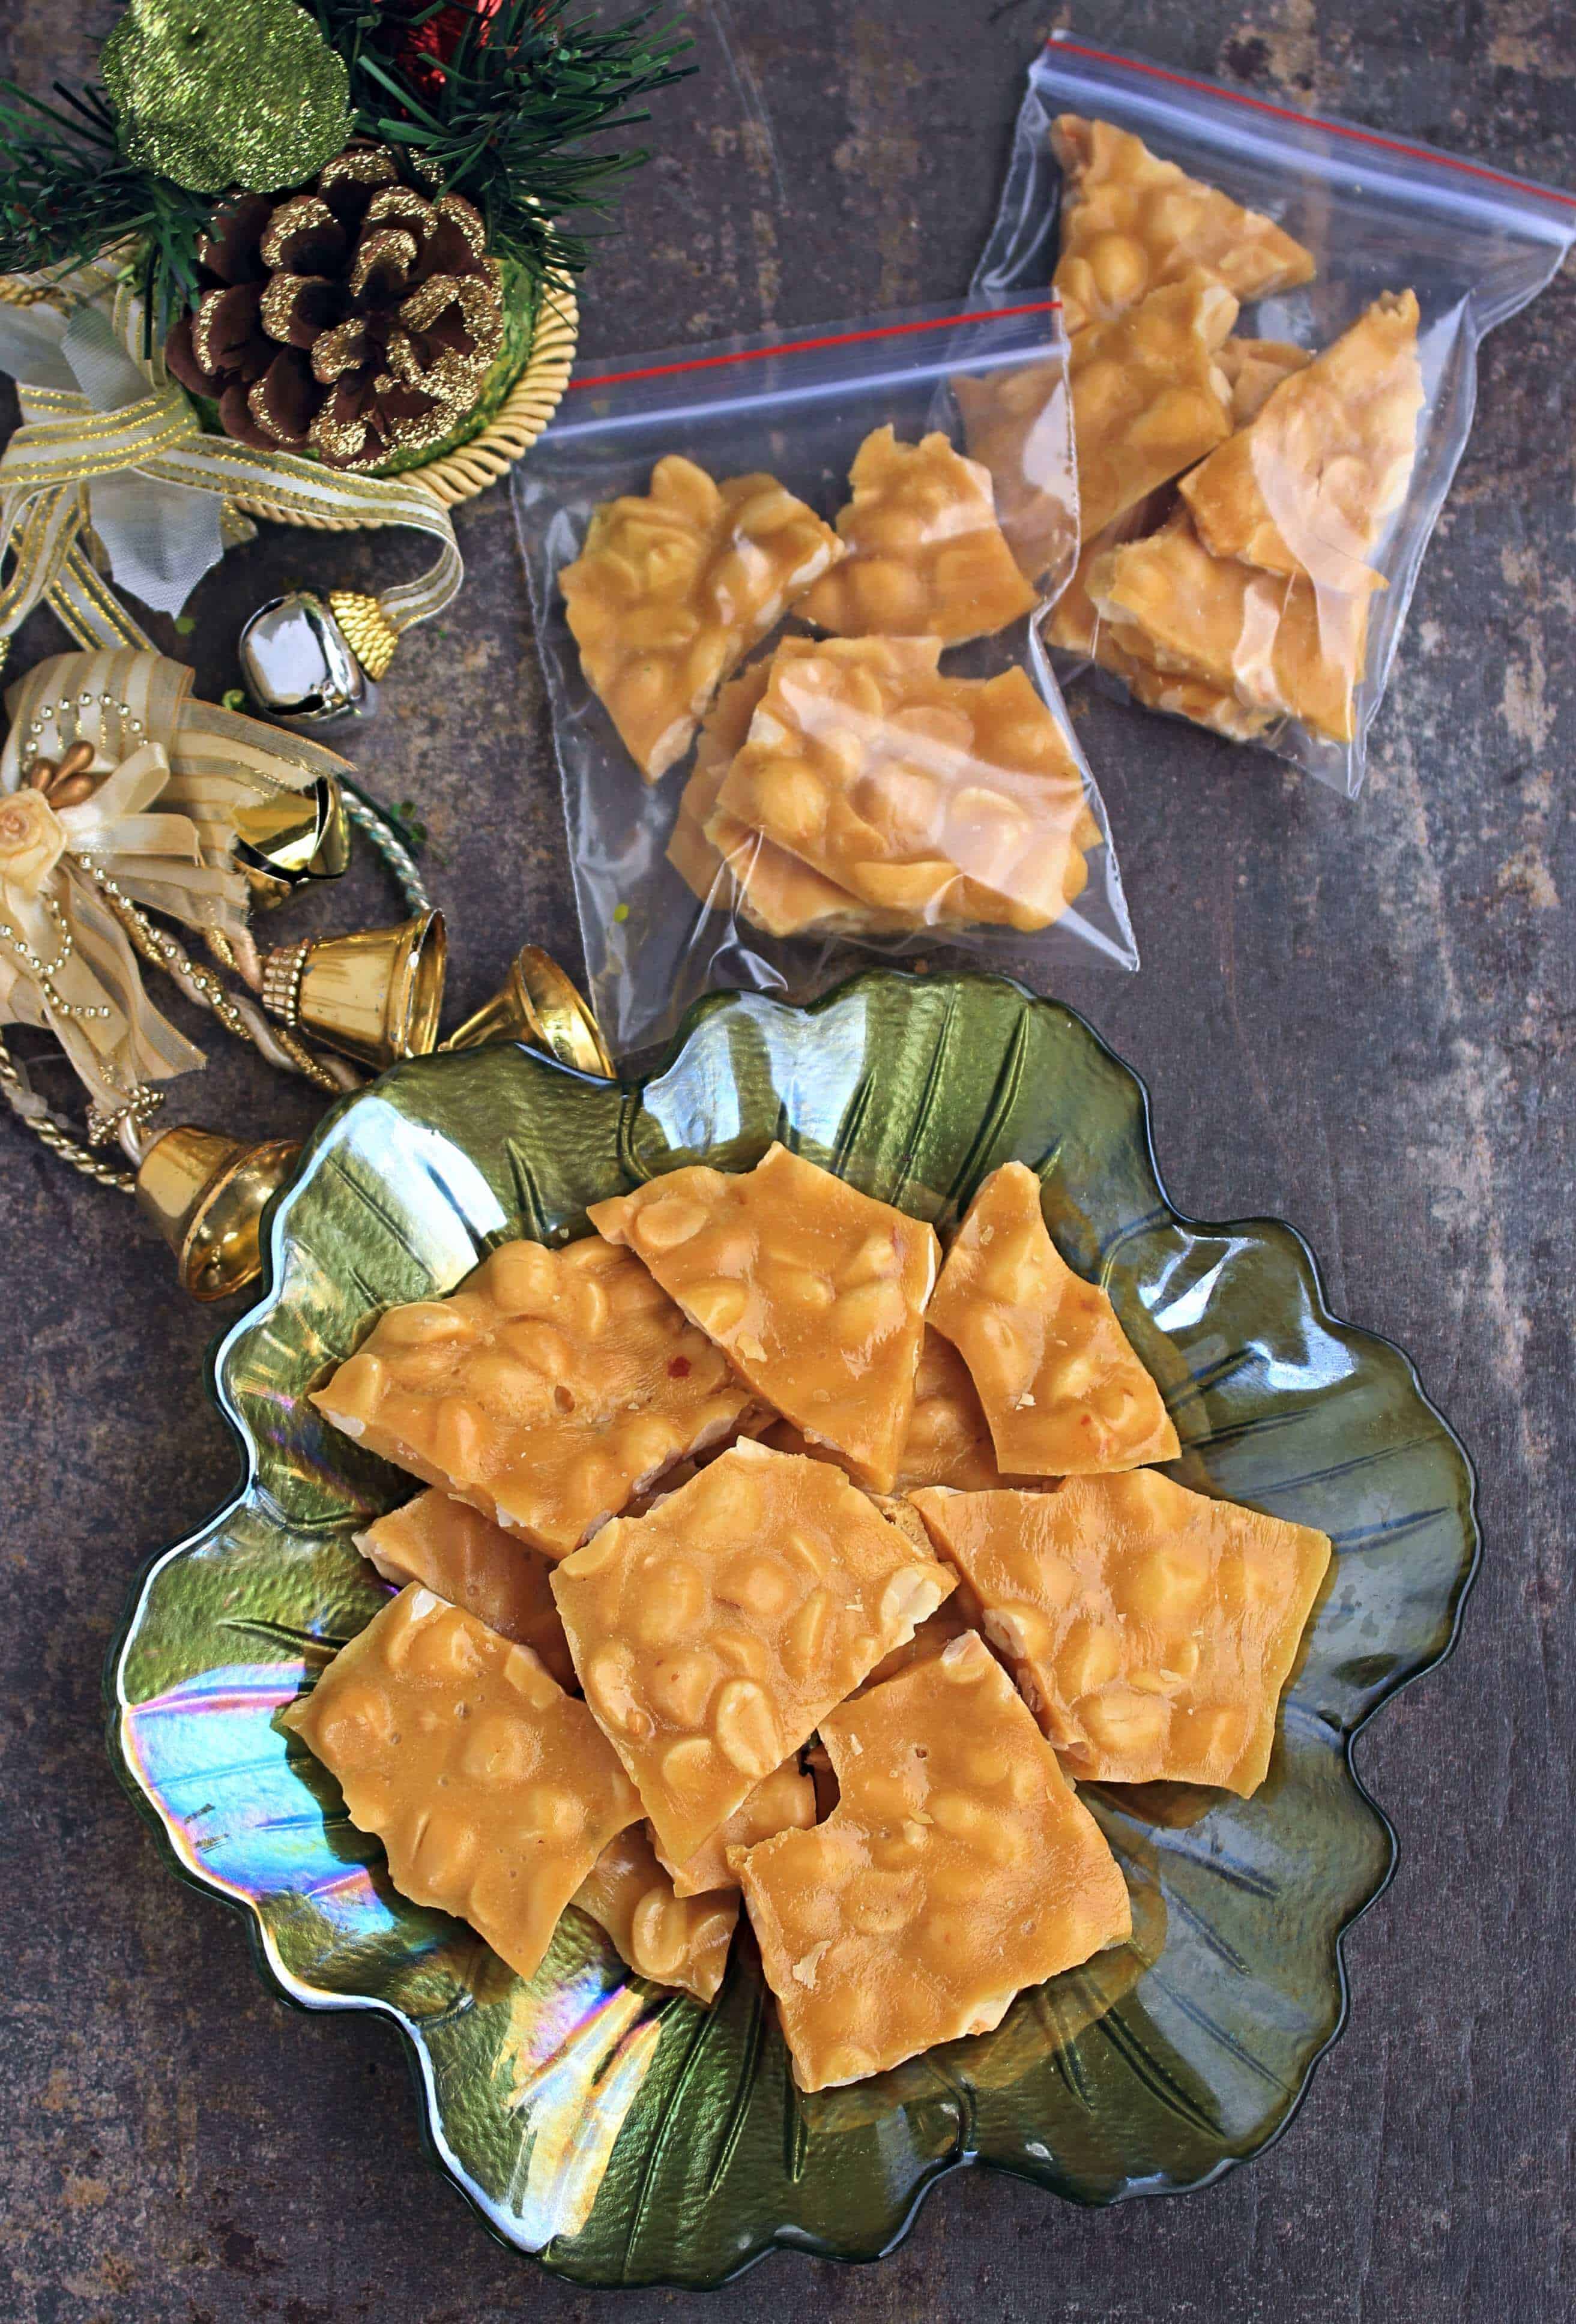 Old Fashioned Peanut Brittle - Some in a plate and some packed in zip lock bags